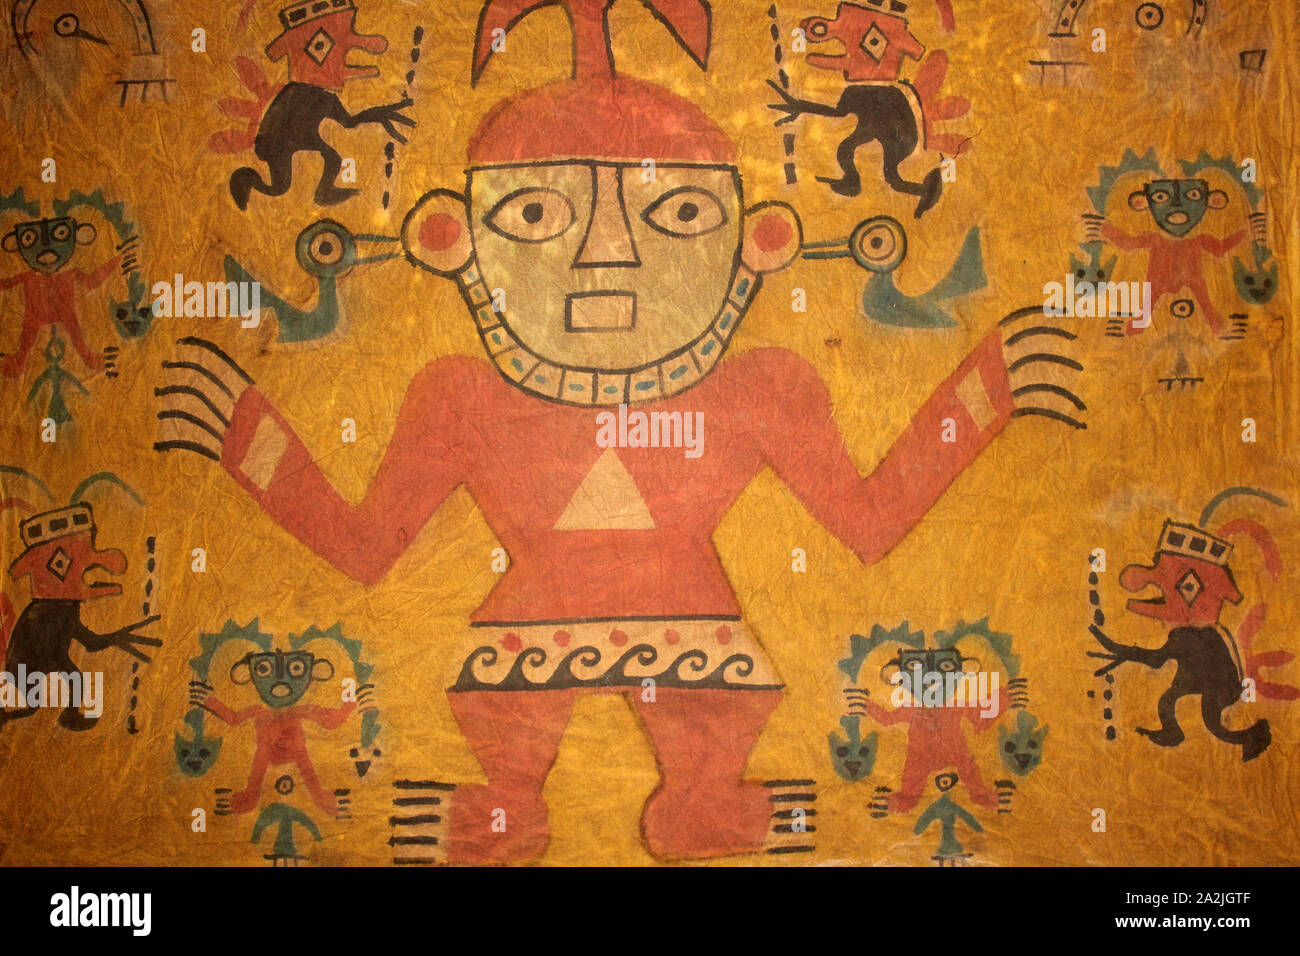 Inti (main figure) - Incan Sun god, son of Viracocha, creator of civilization depicted as smaller figures holding thunderbolts. Stock Photo